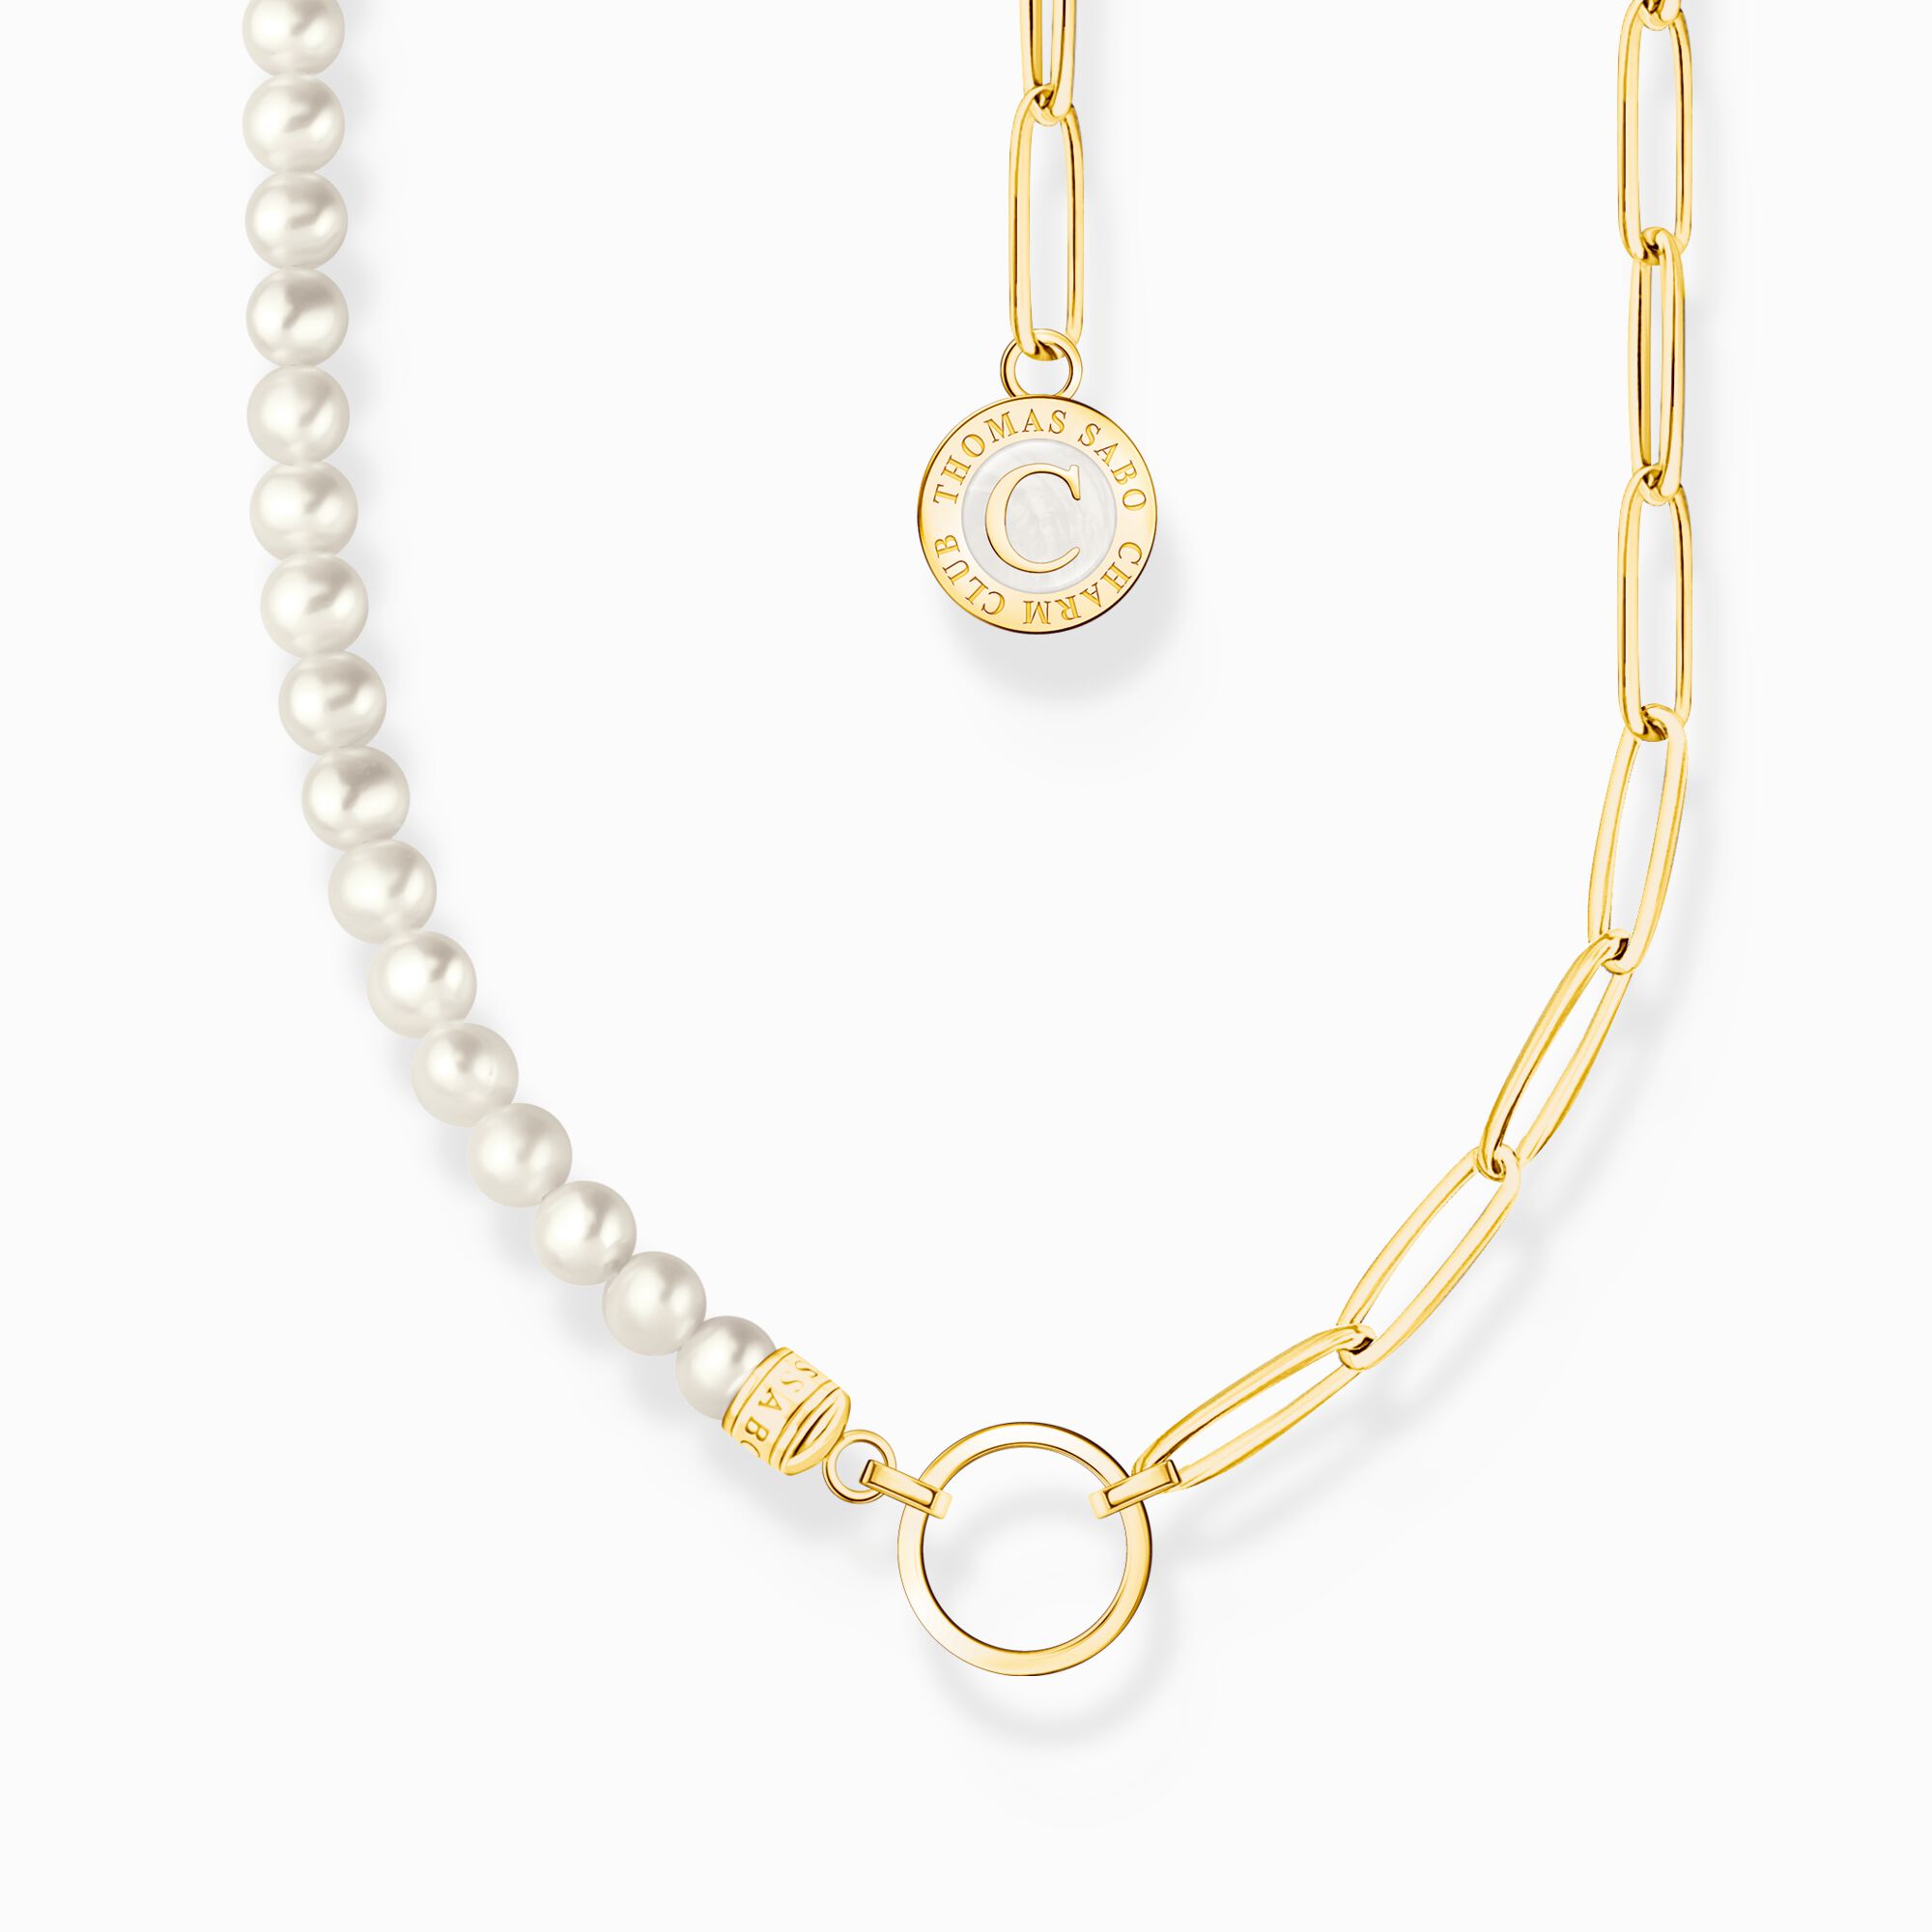 Member Charm necklace with white pearls and Charmista disc gold plated from the Charm Club collection in the THOMAS SABO online store